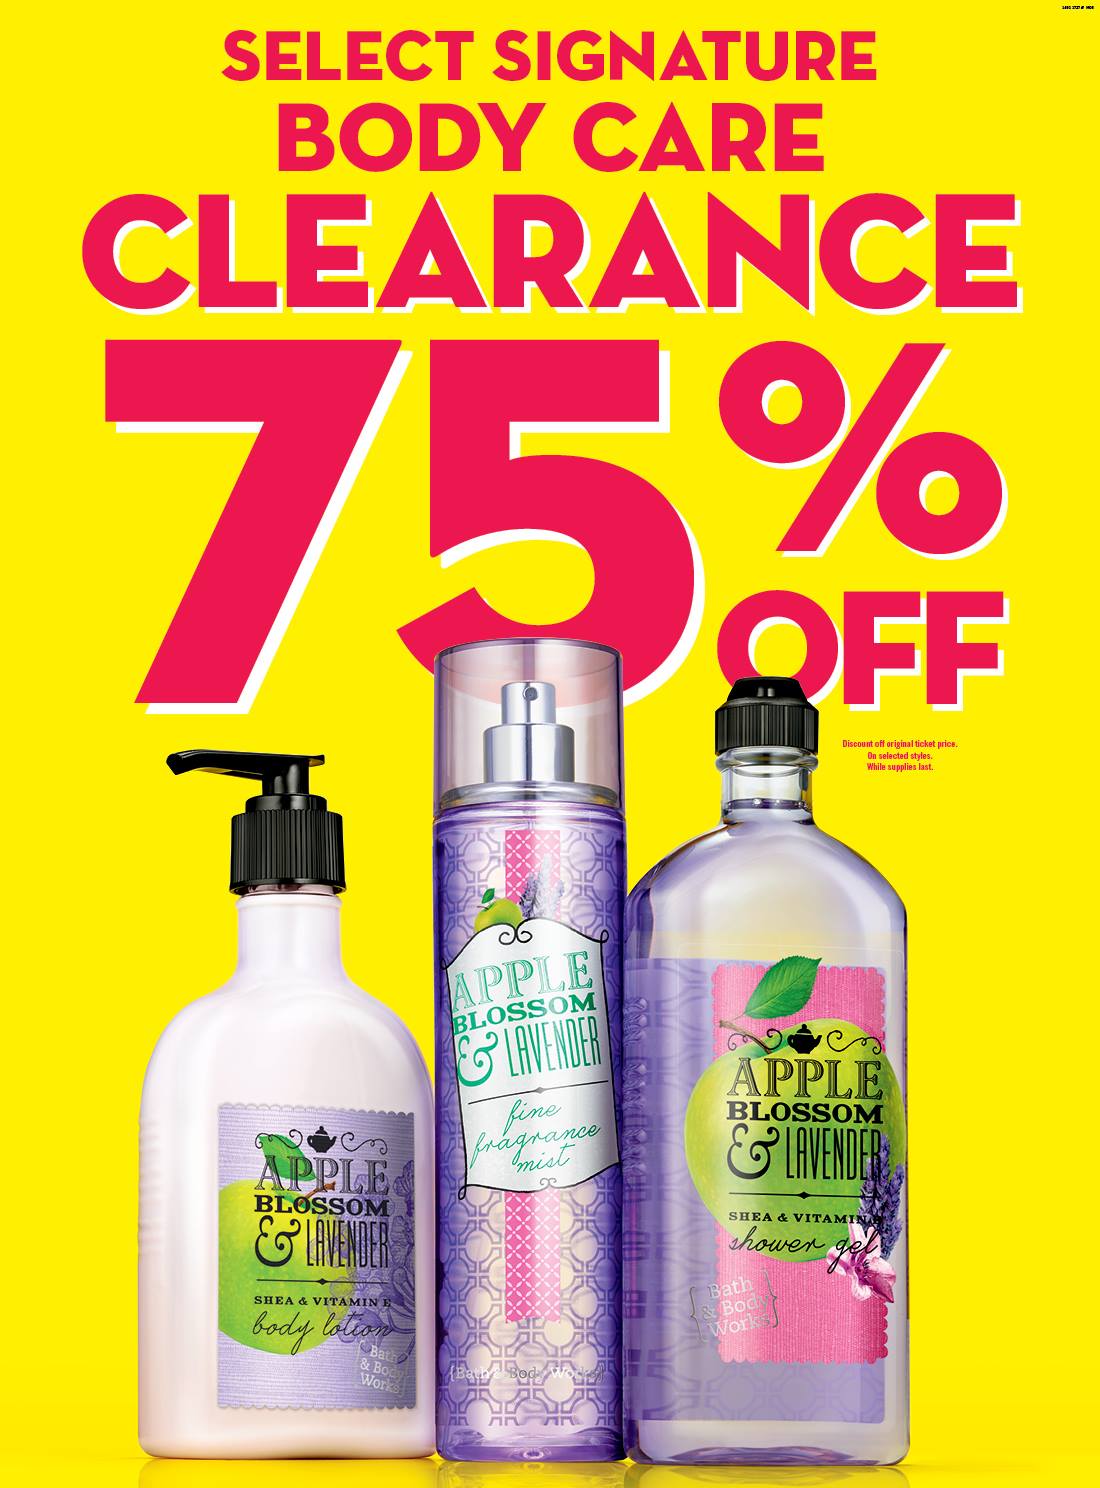 50% Off Clearance, Lids Semi-Annual Clearance Sale Is Here! 50% Off Select  Clearance While Supplies Last!